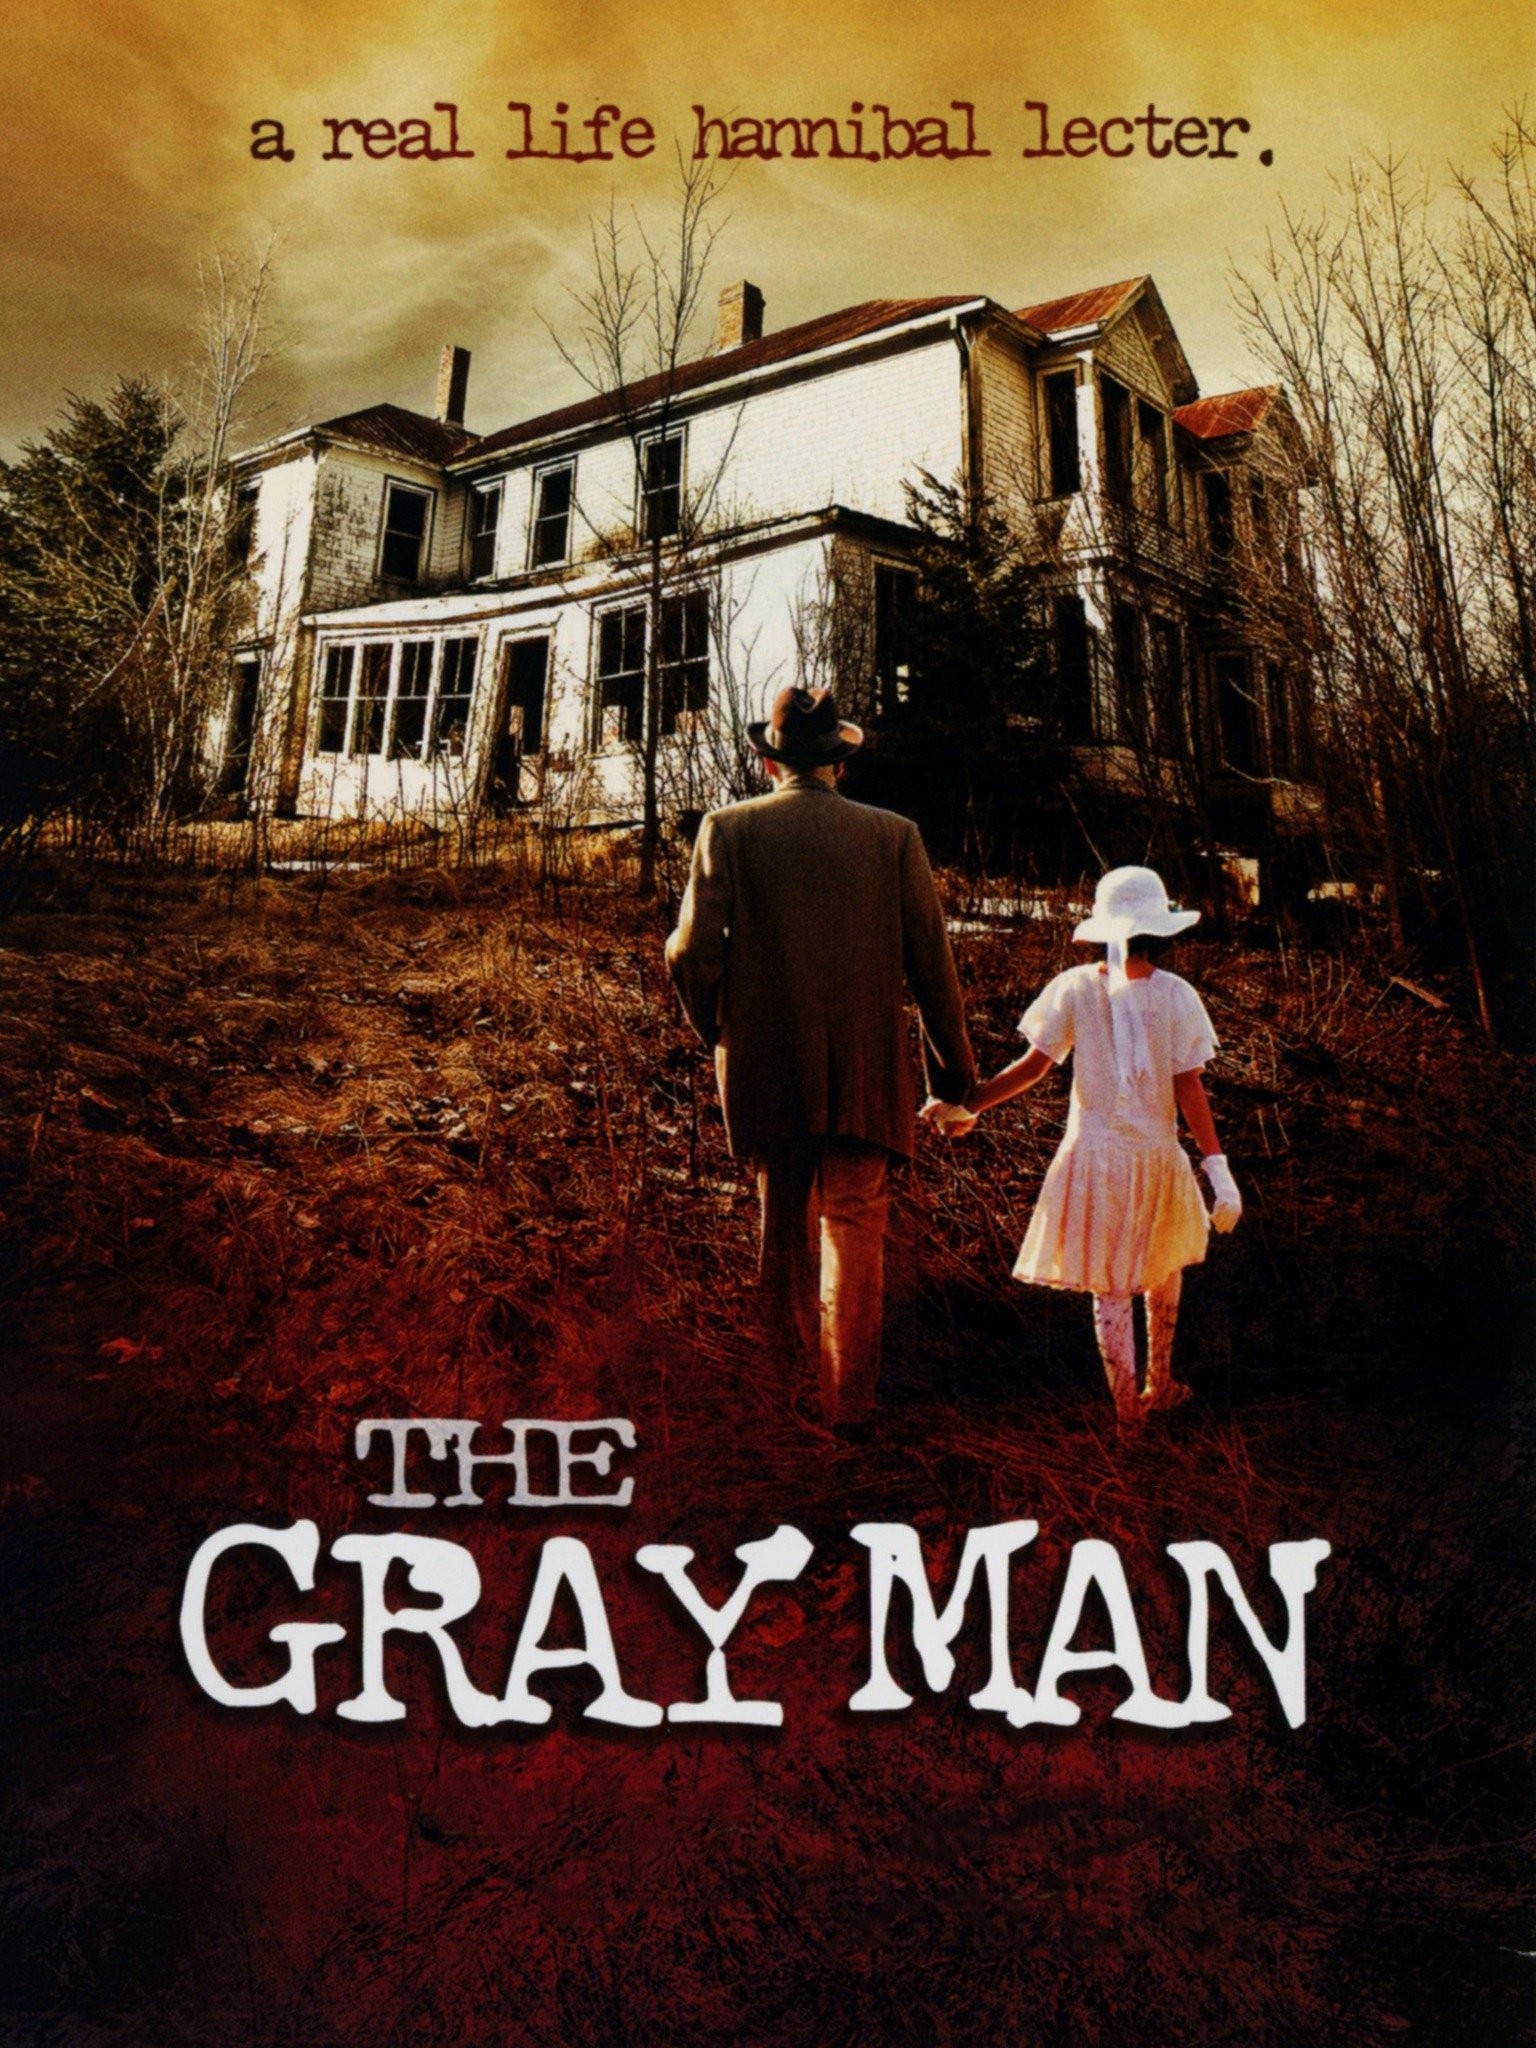 The Gray Man' Women Are the Heart of the Film